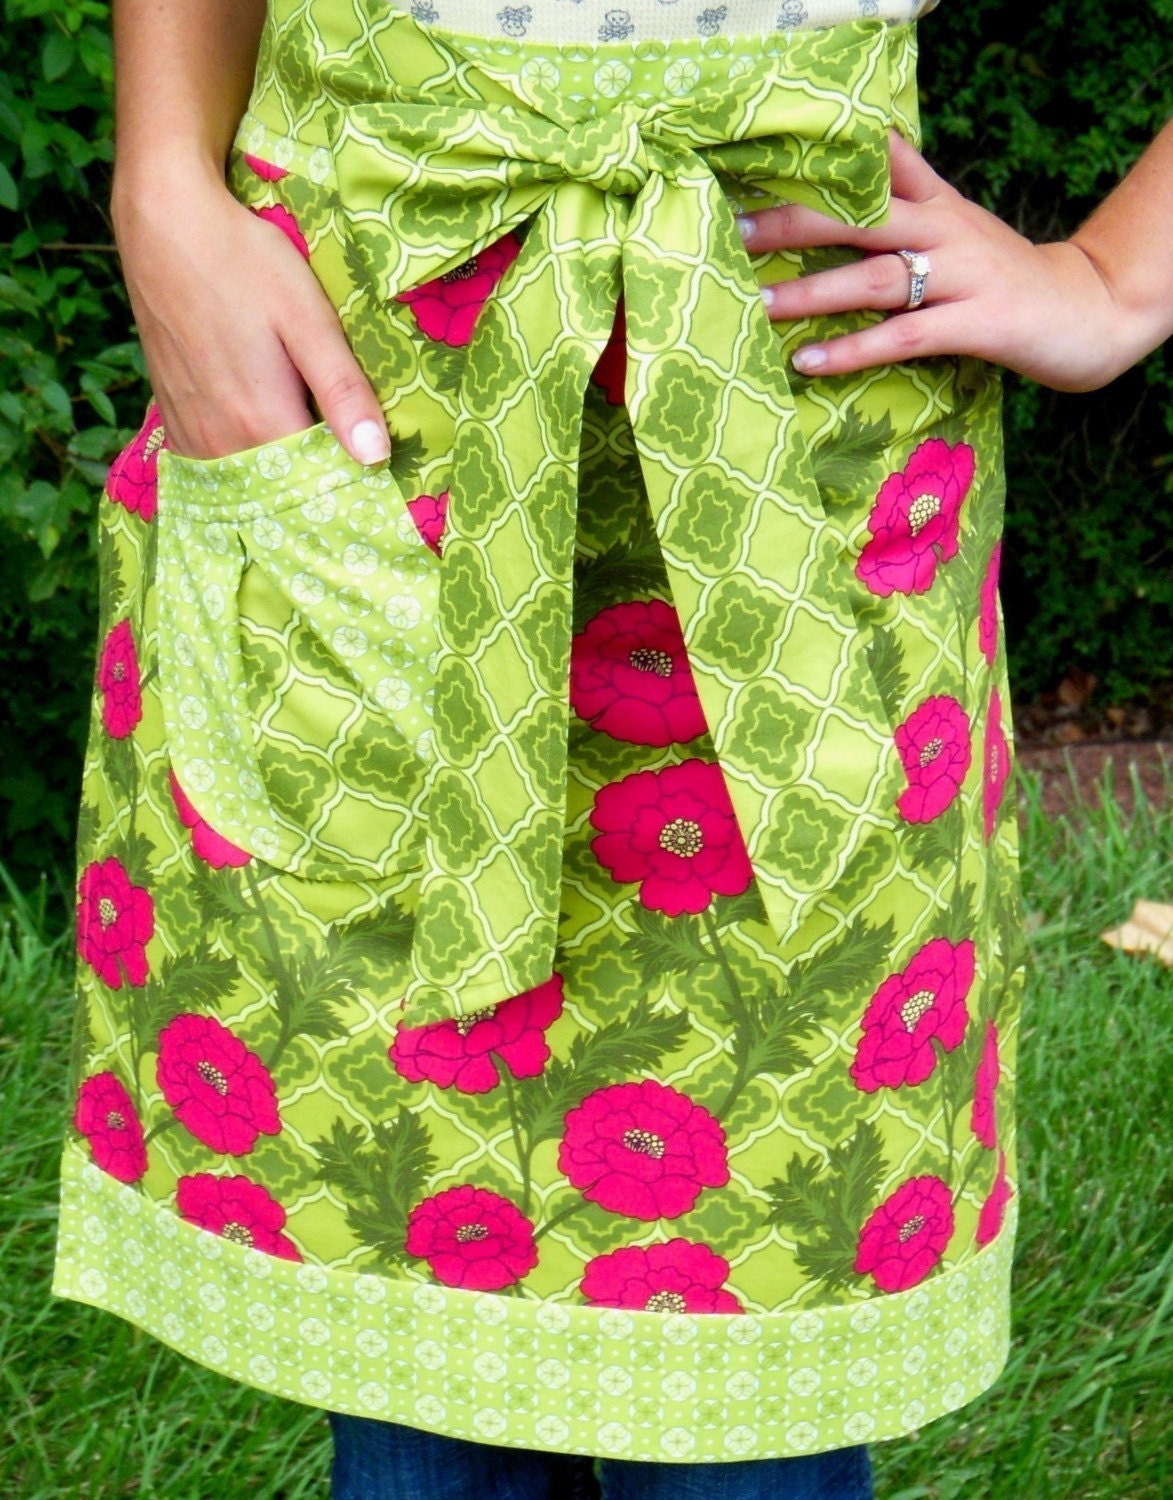 Apron Sewing Patterns for Kids | eHow.com